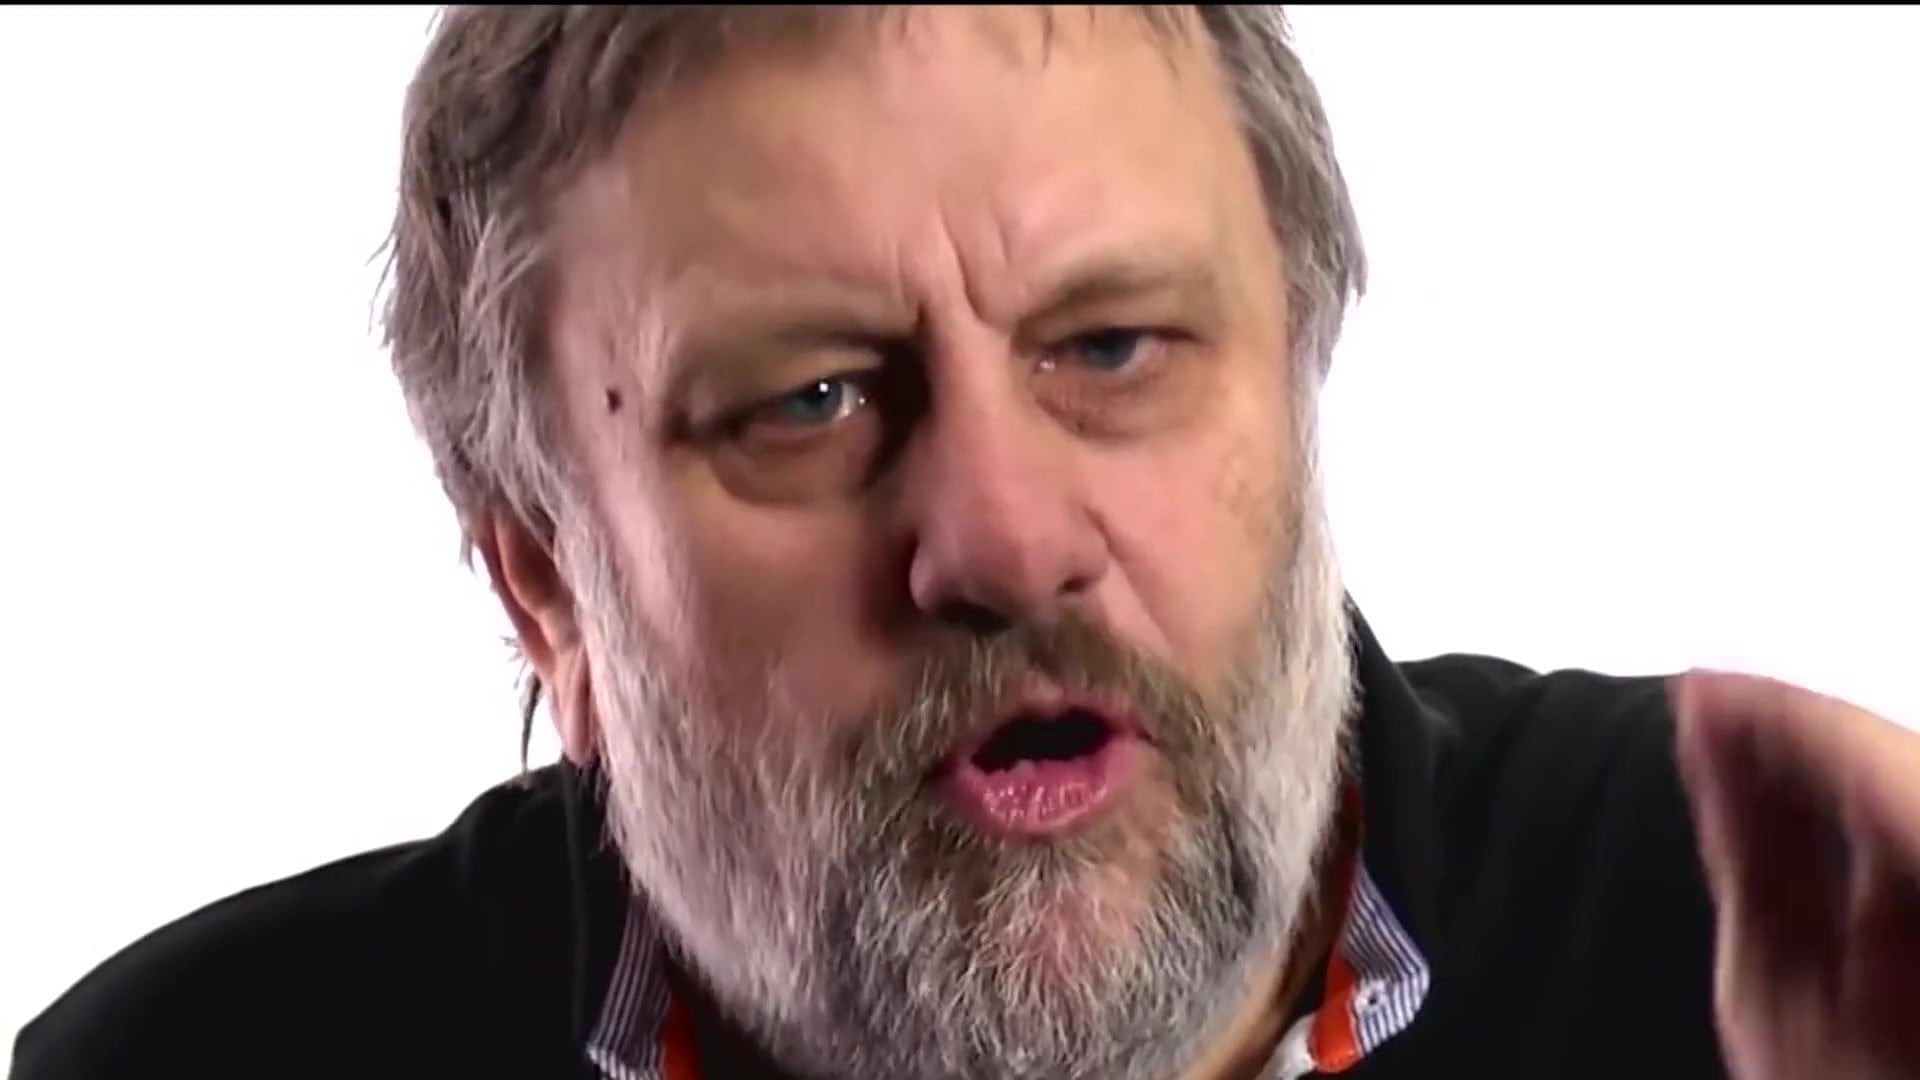 Online dating. Tell me about it, Slavoj. 